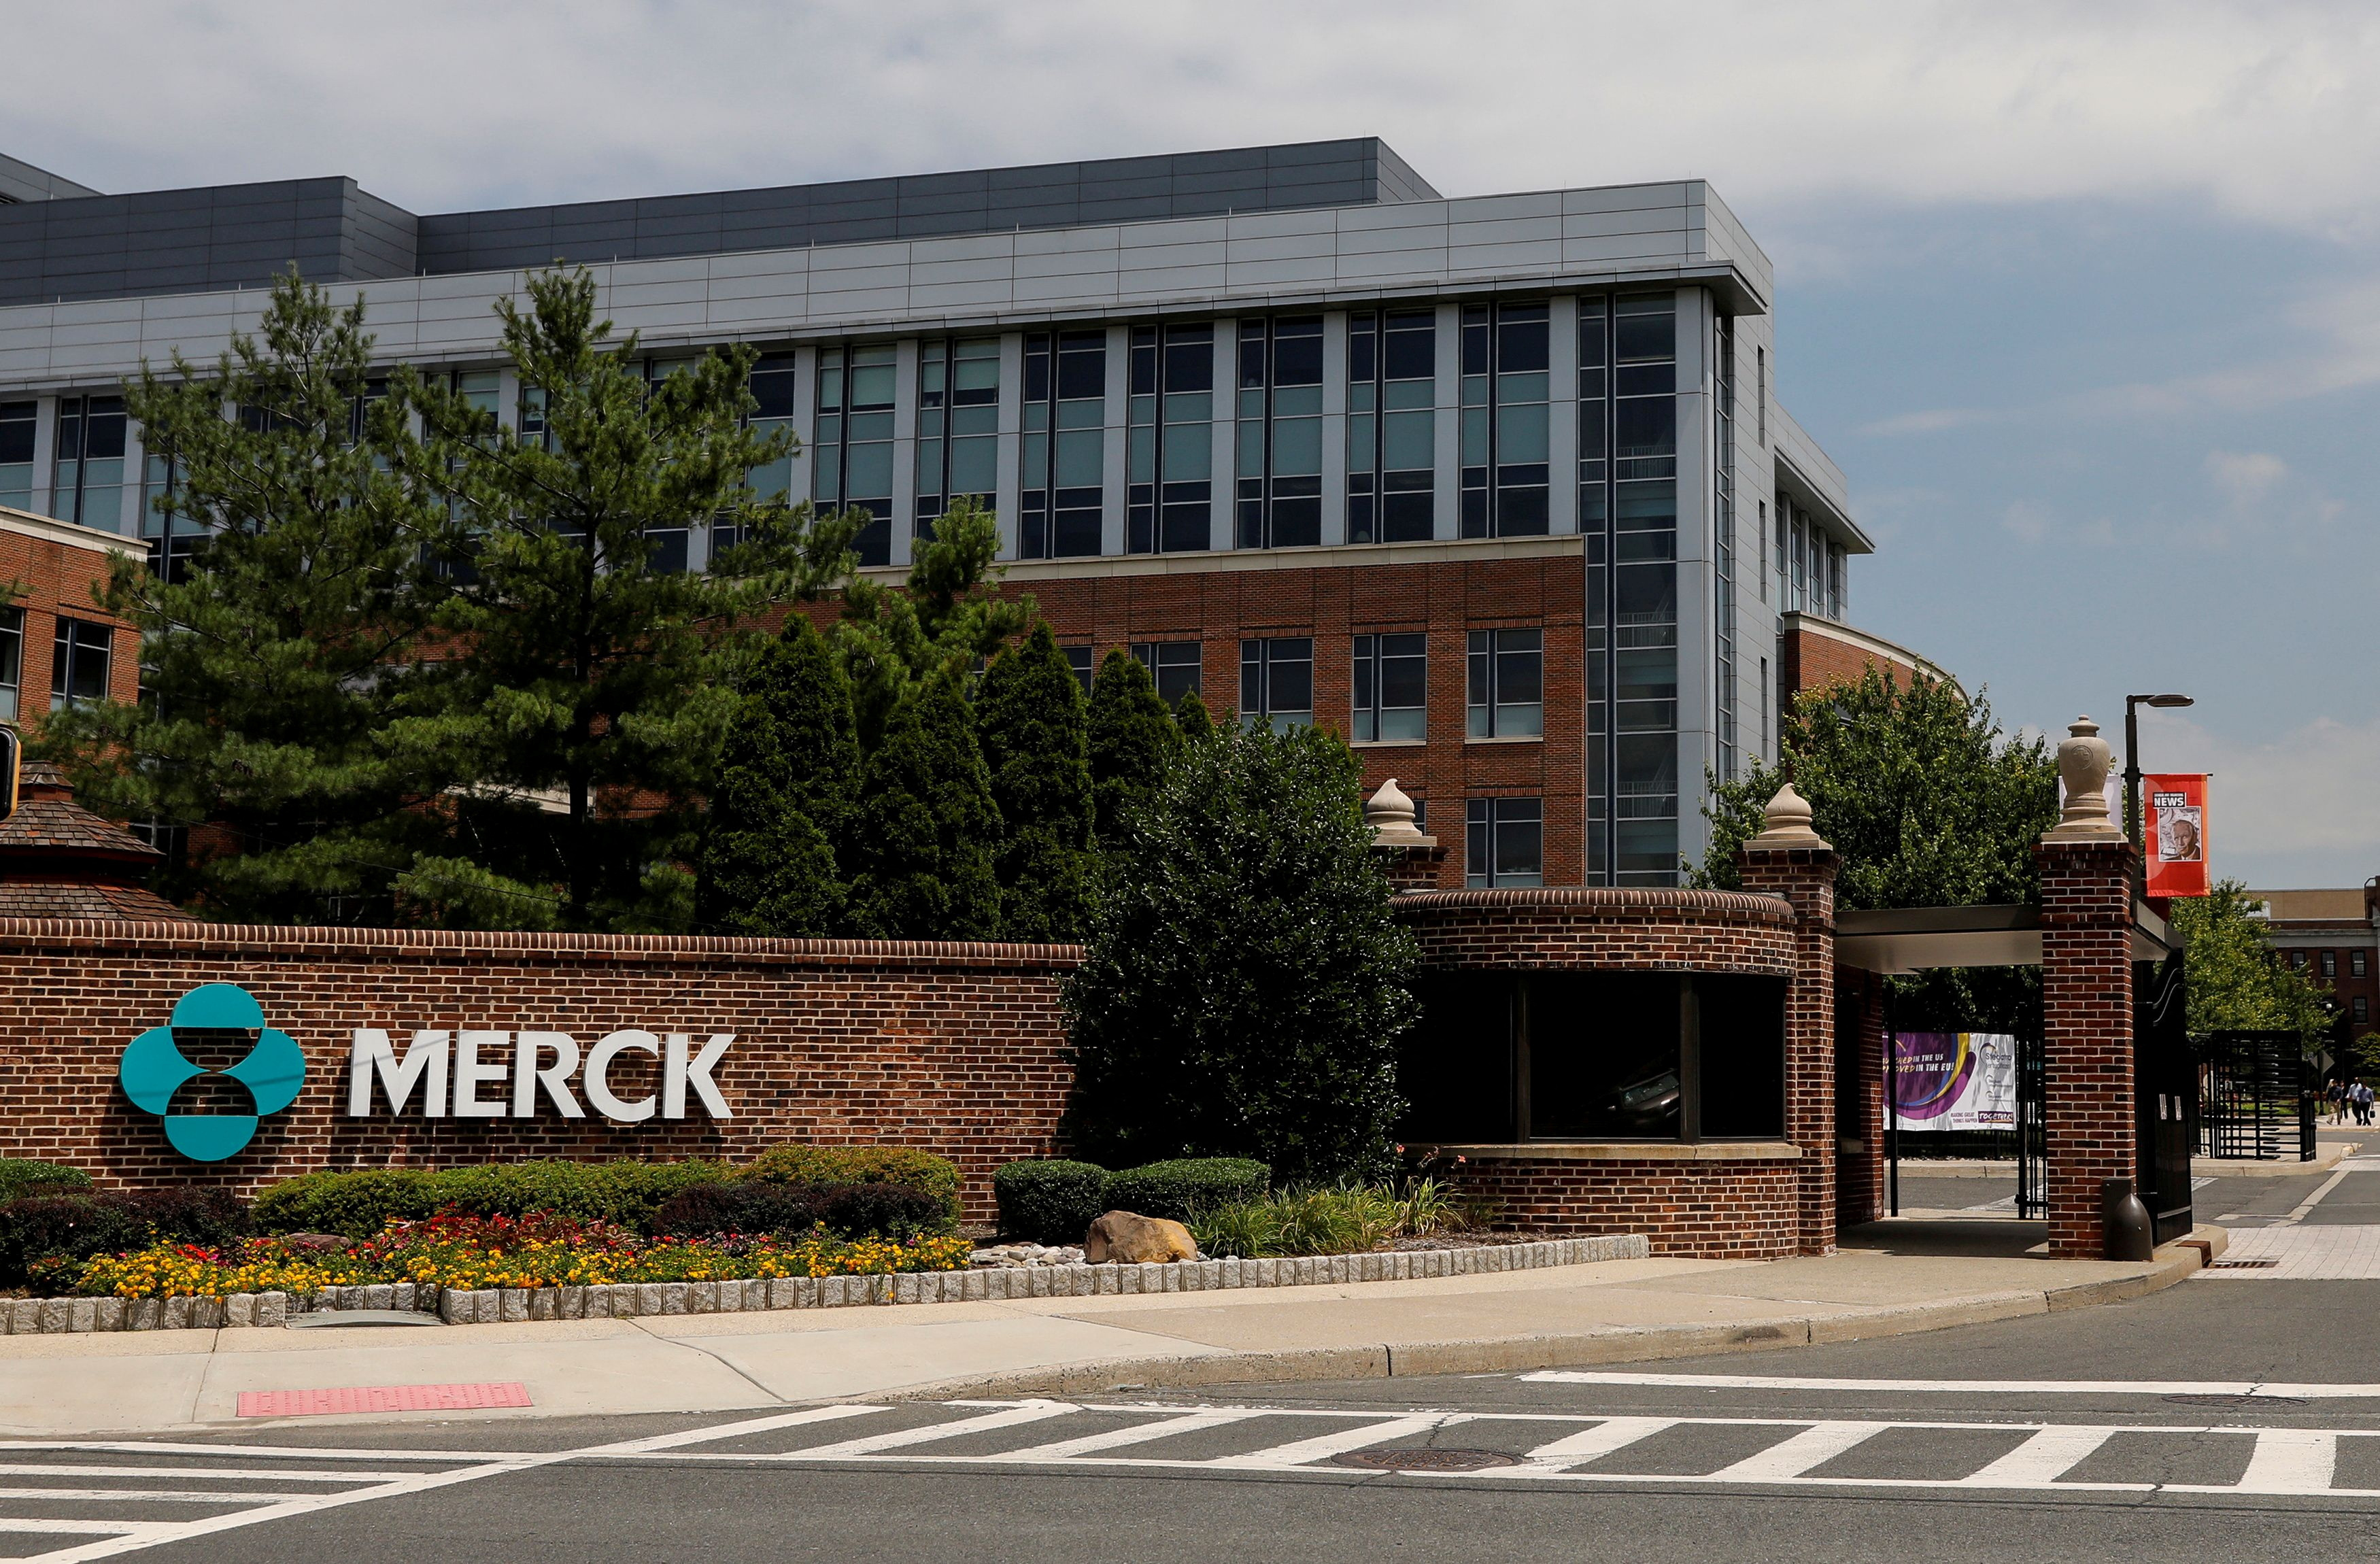 The Merck logo is seen at a gate to the Merck & Co campus in Rahway, New Jersey, New Jersey